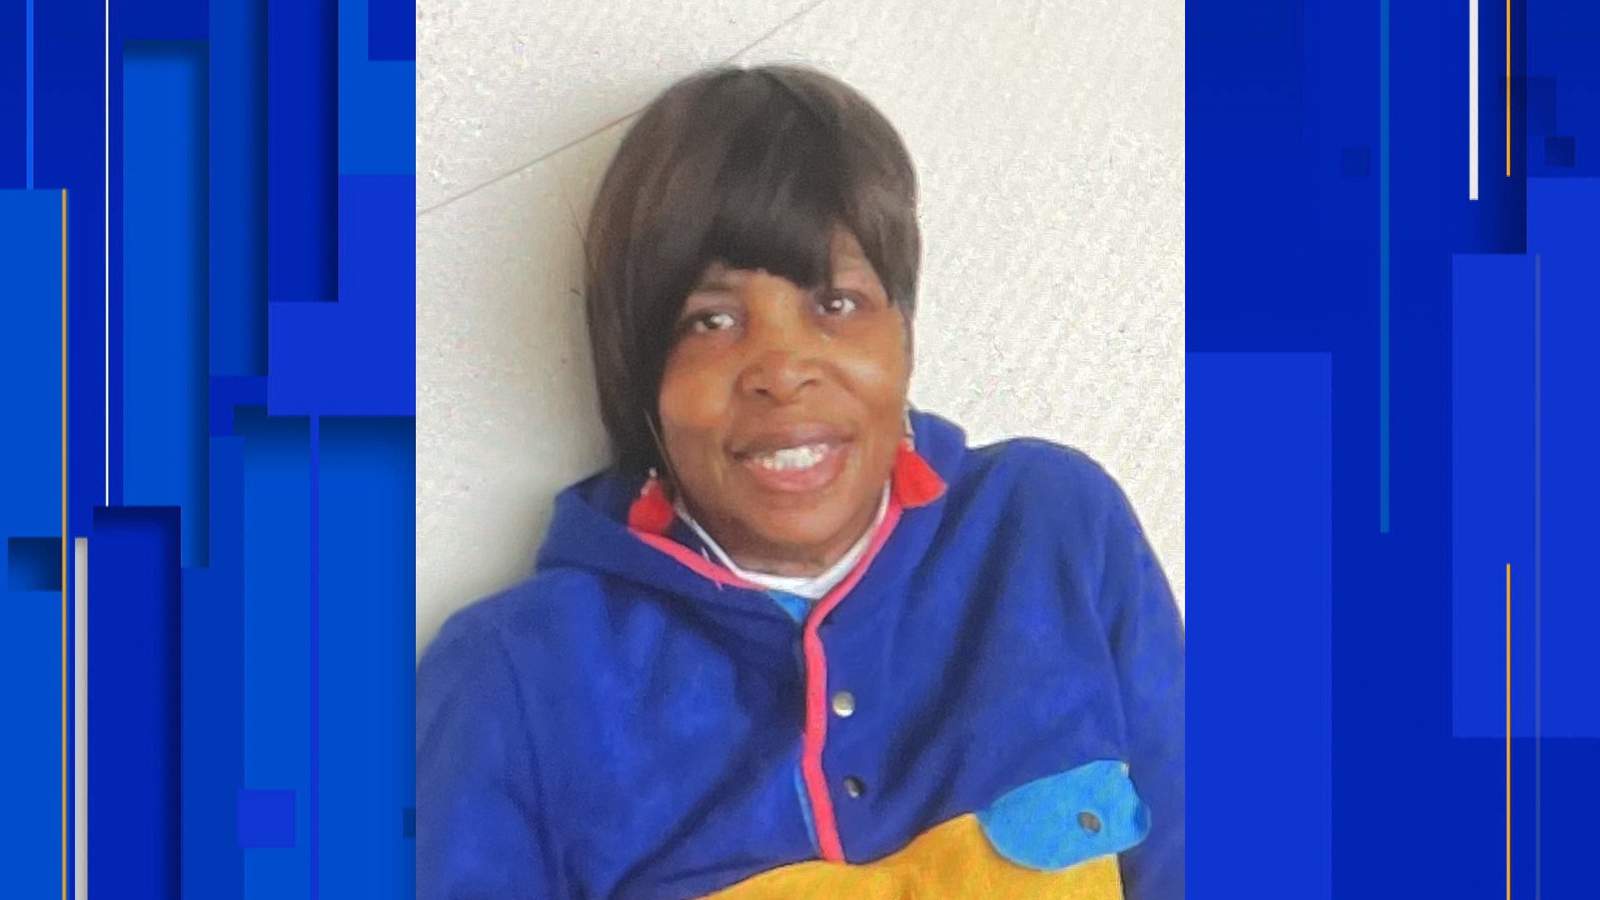 Detroit police want help finding a missing 71-year-old woman